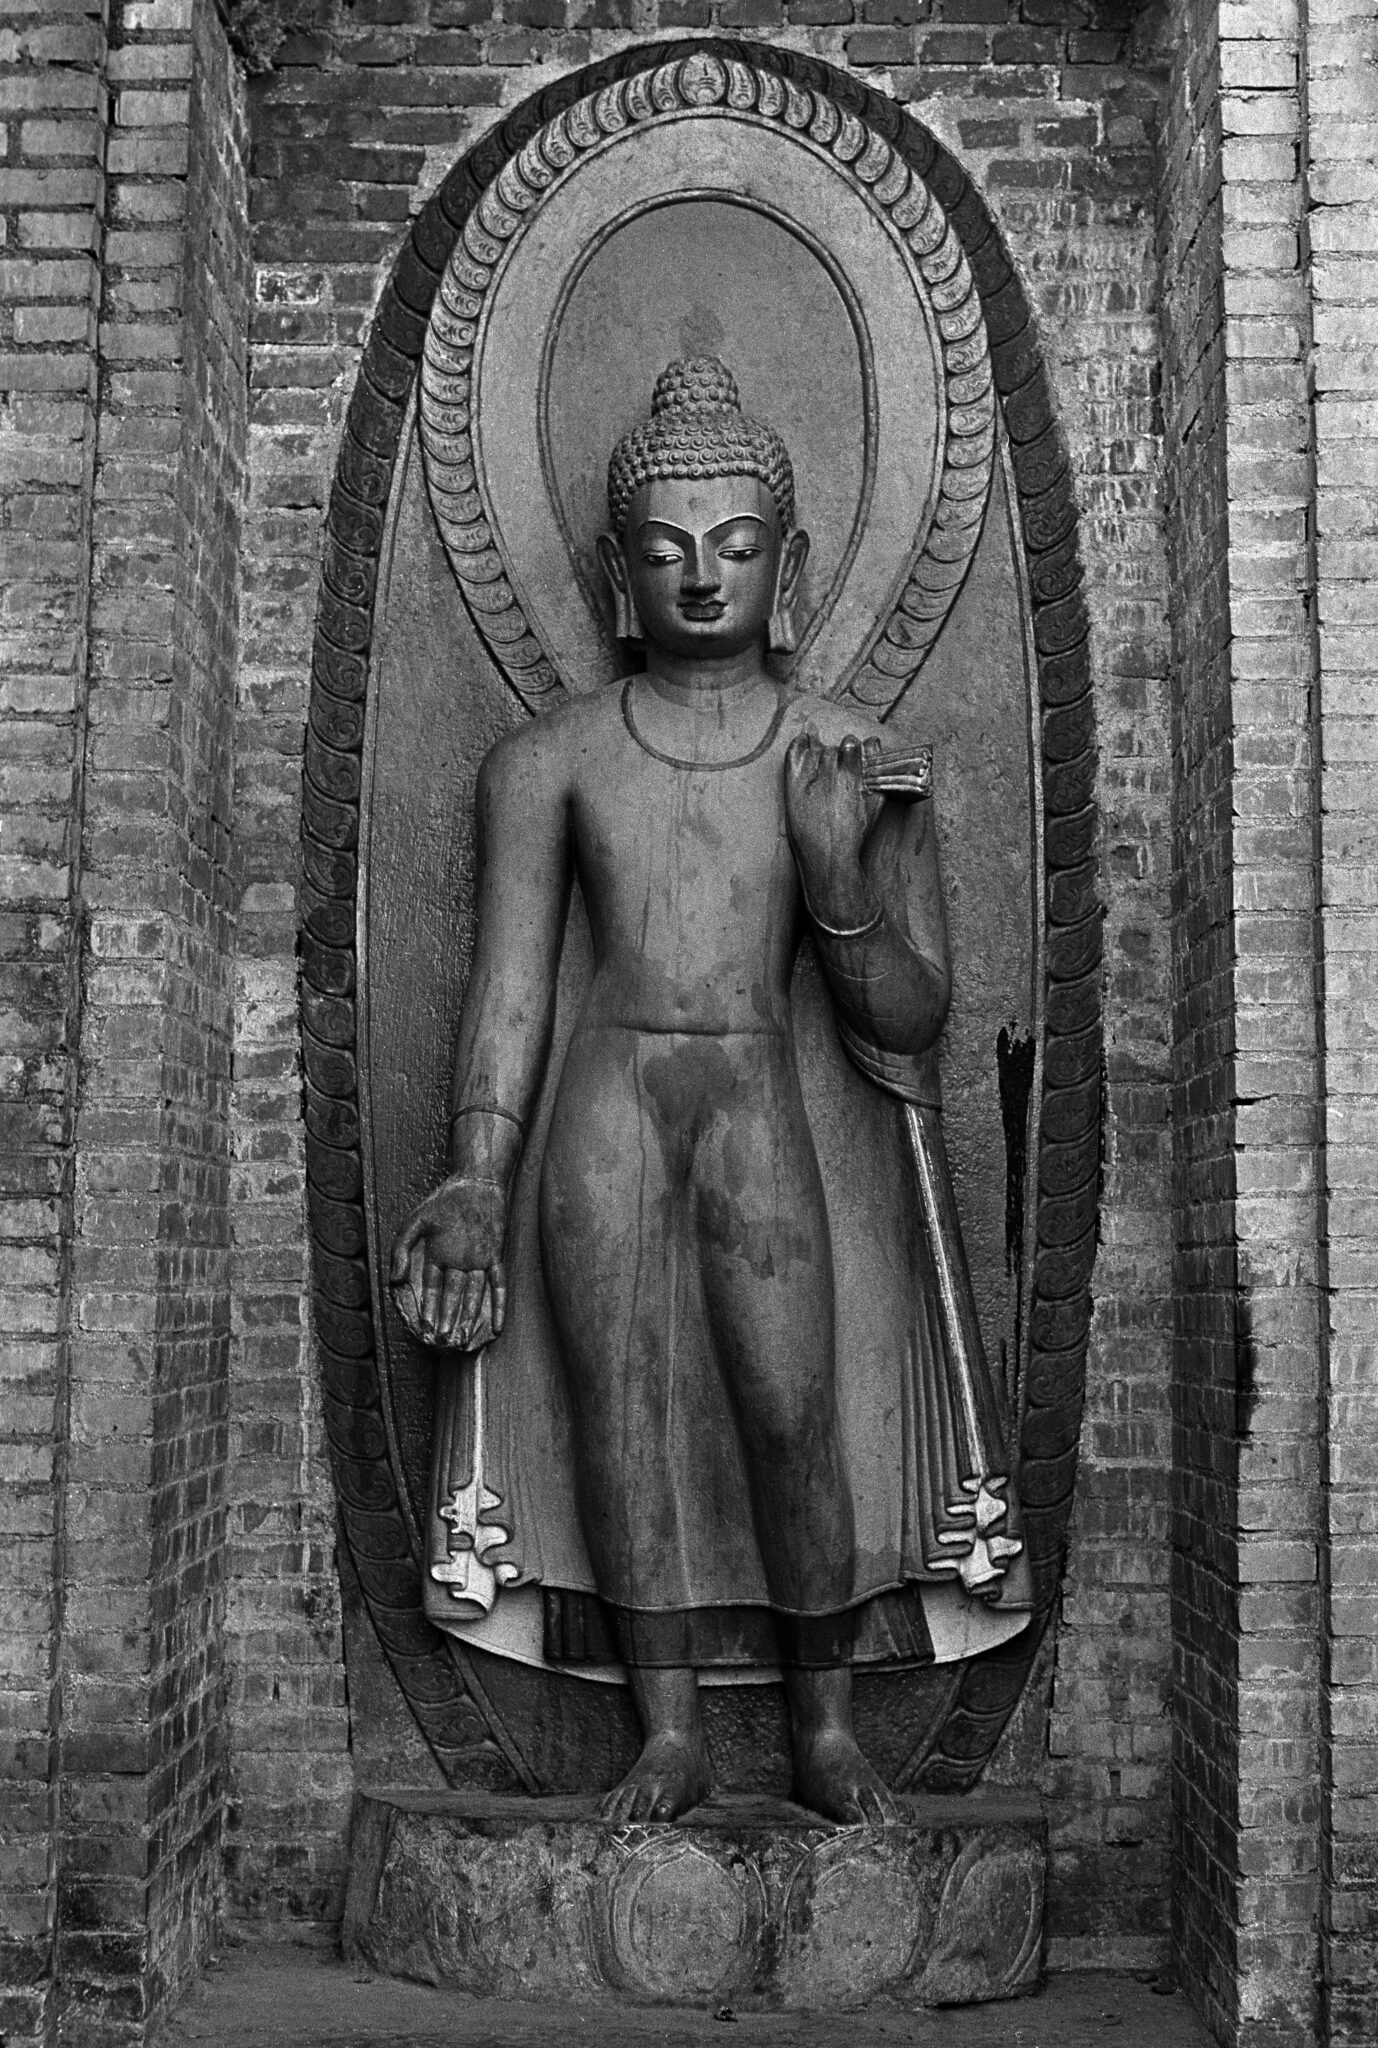 Black and white photograph of Buddha standing with right hand raised in mudra situated in brickwork niche